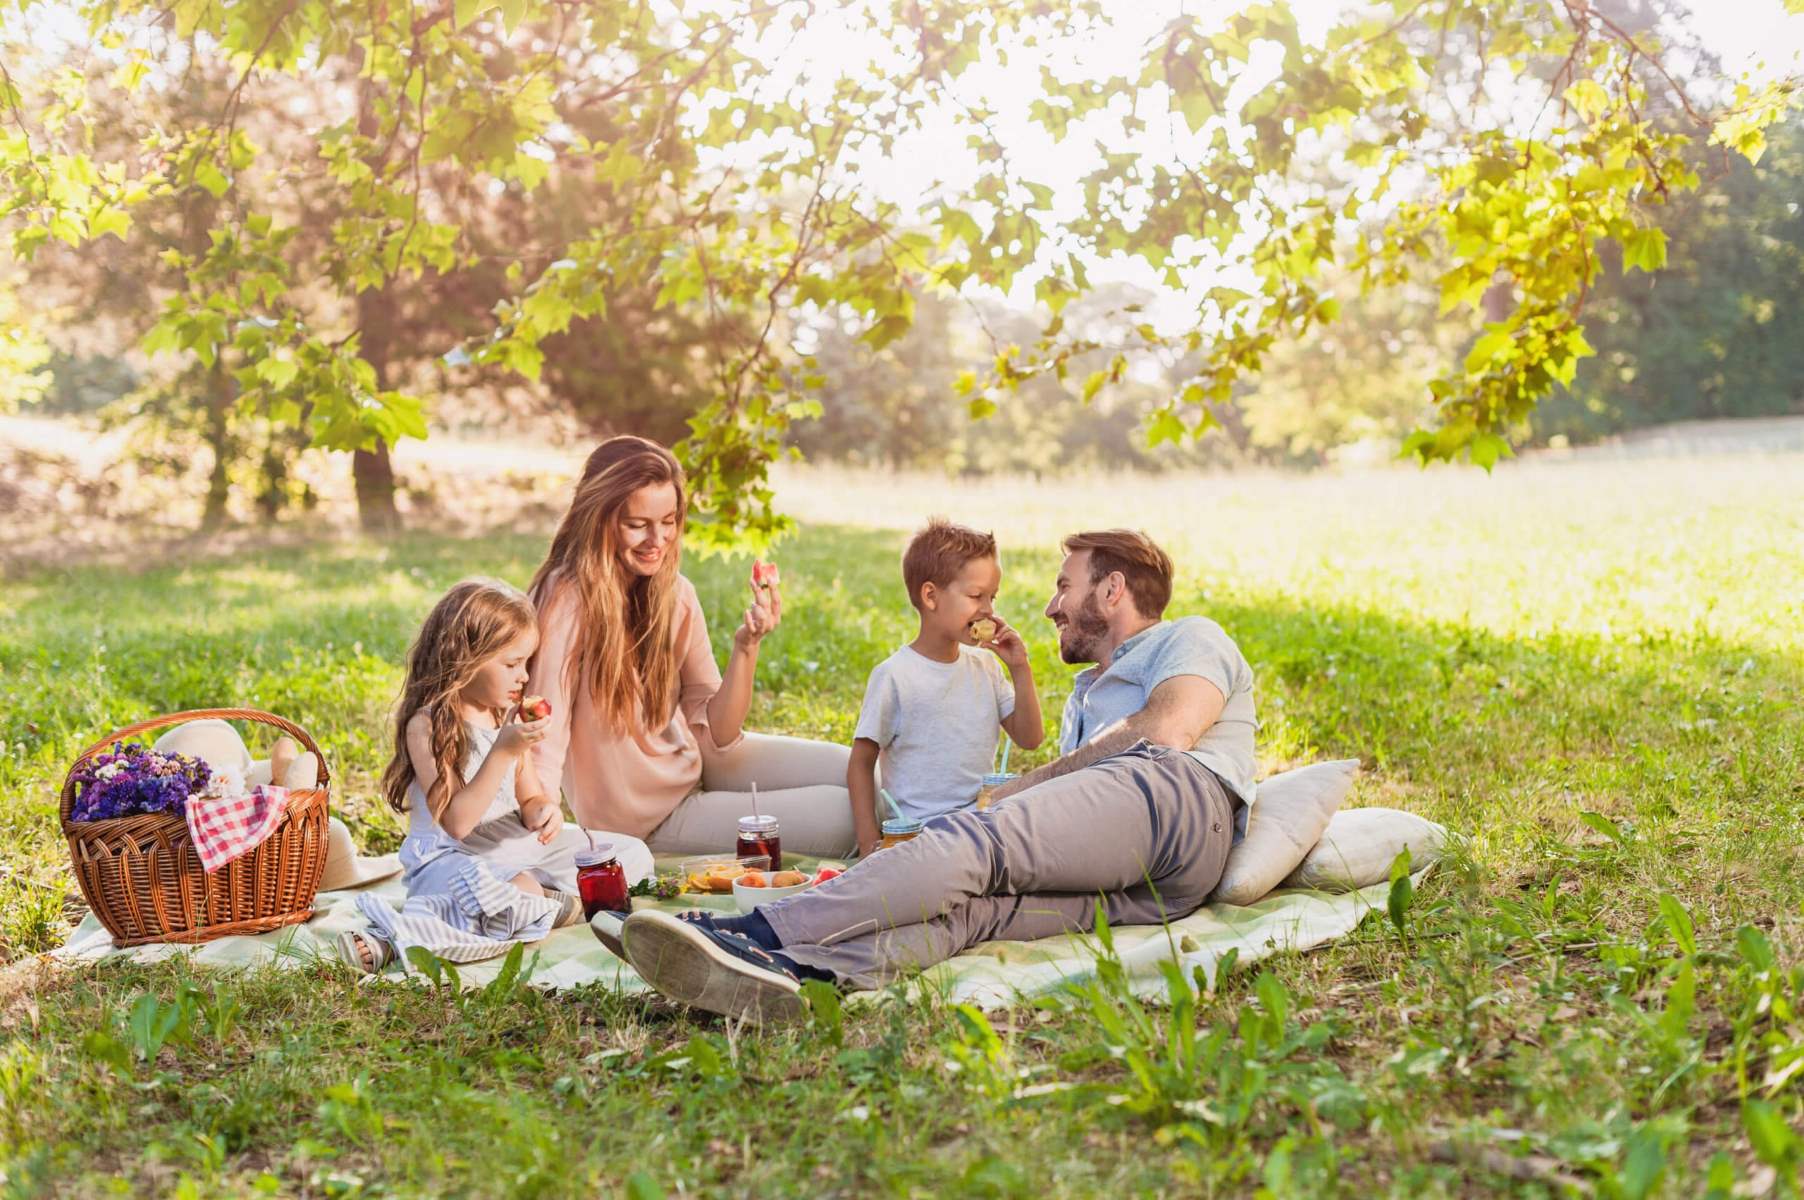 15 Facts About National Picnic Day April 23rd 